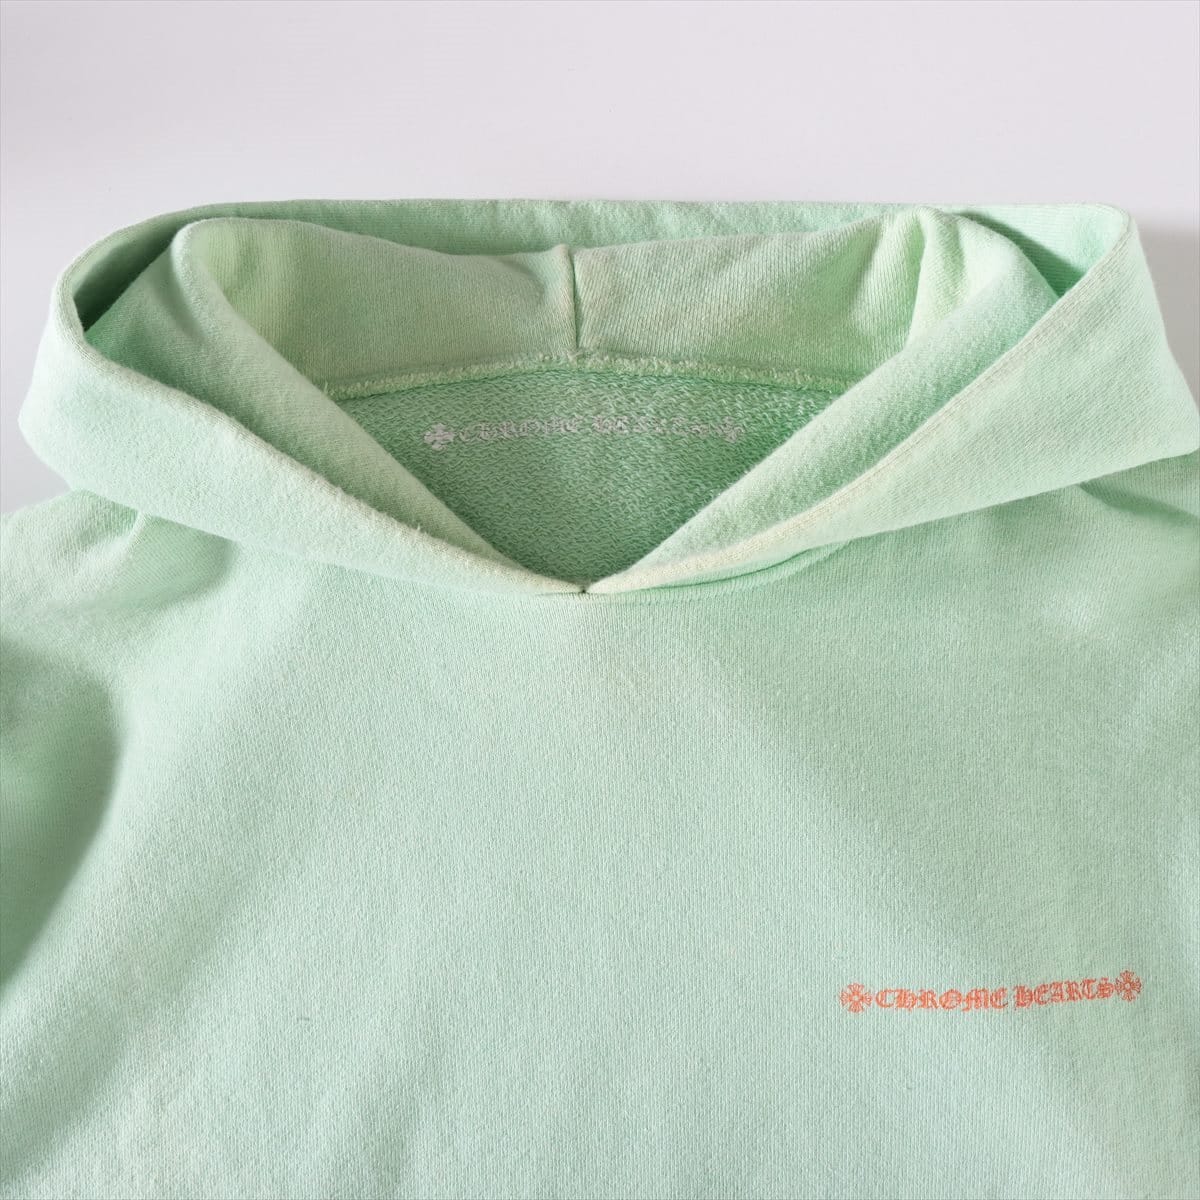 Chrome Hearts Matty Boy Parker Cotton XXL Green Stain around the neck There are stains